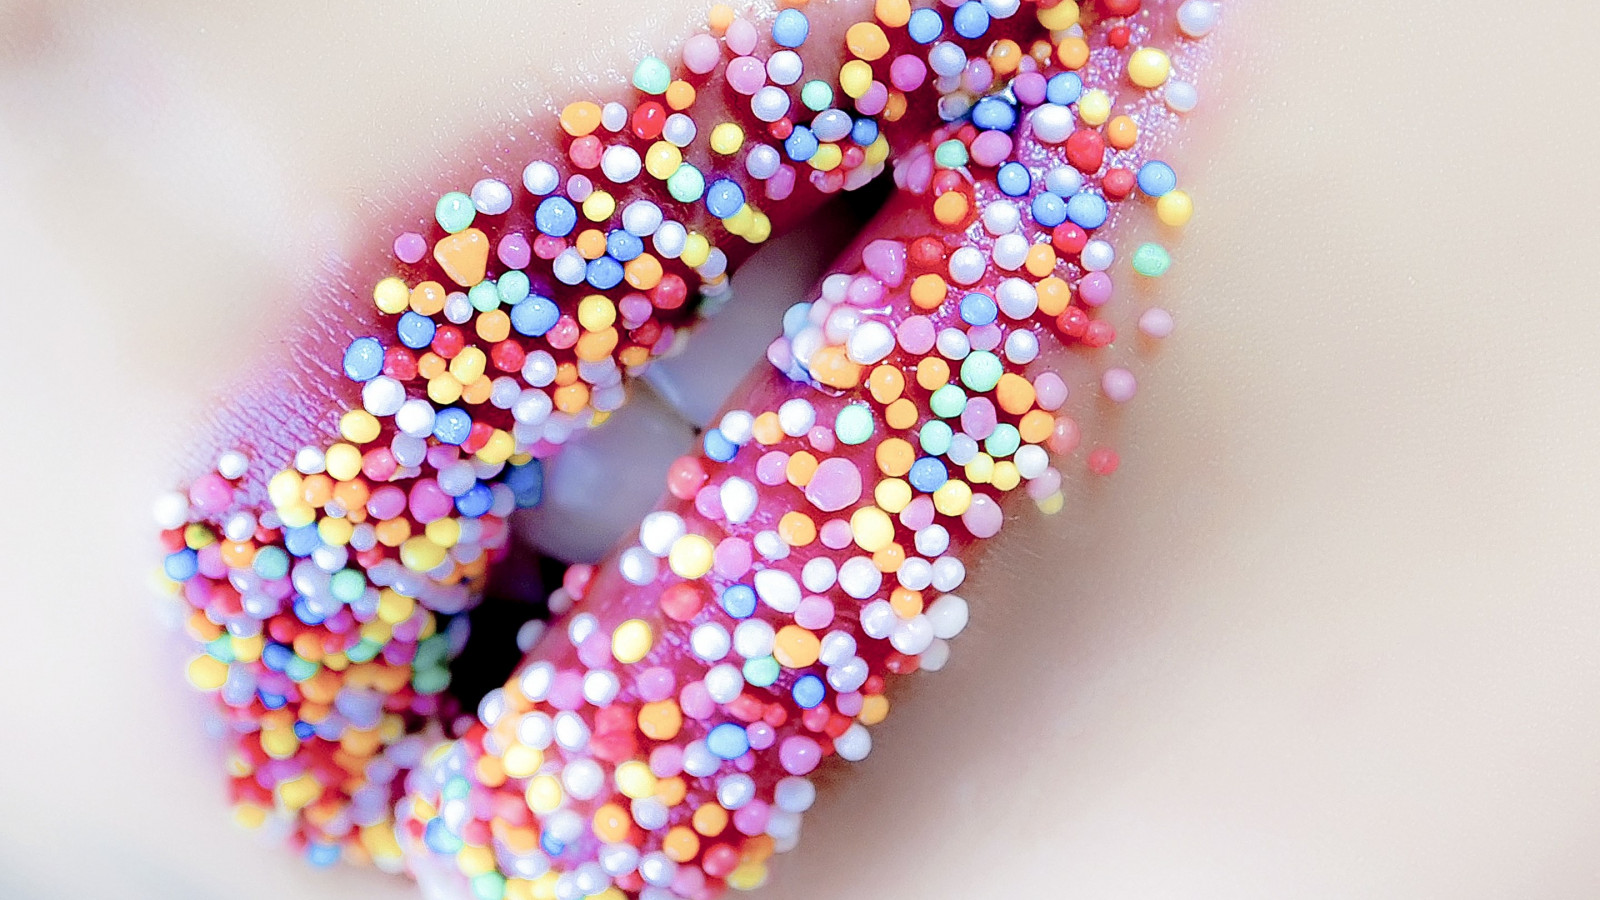 Lips with sweets wallpaper 1600x900